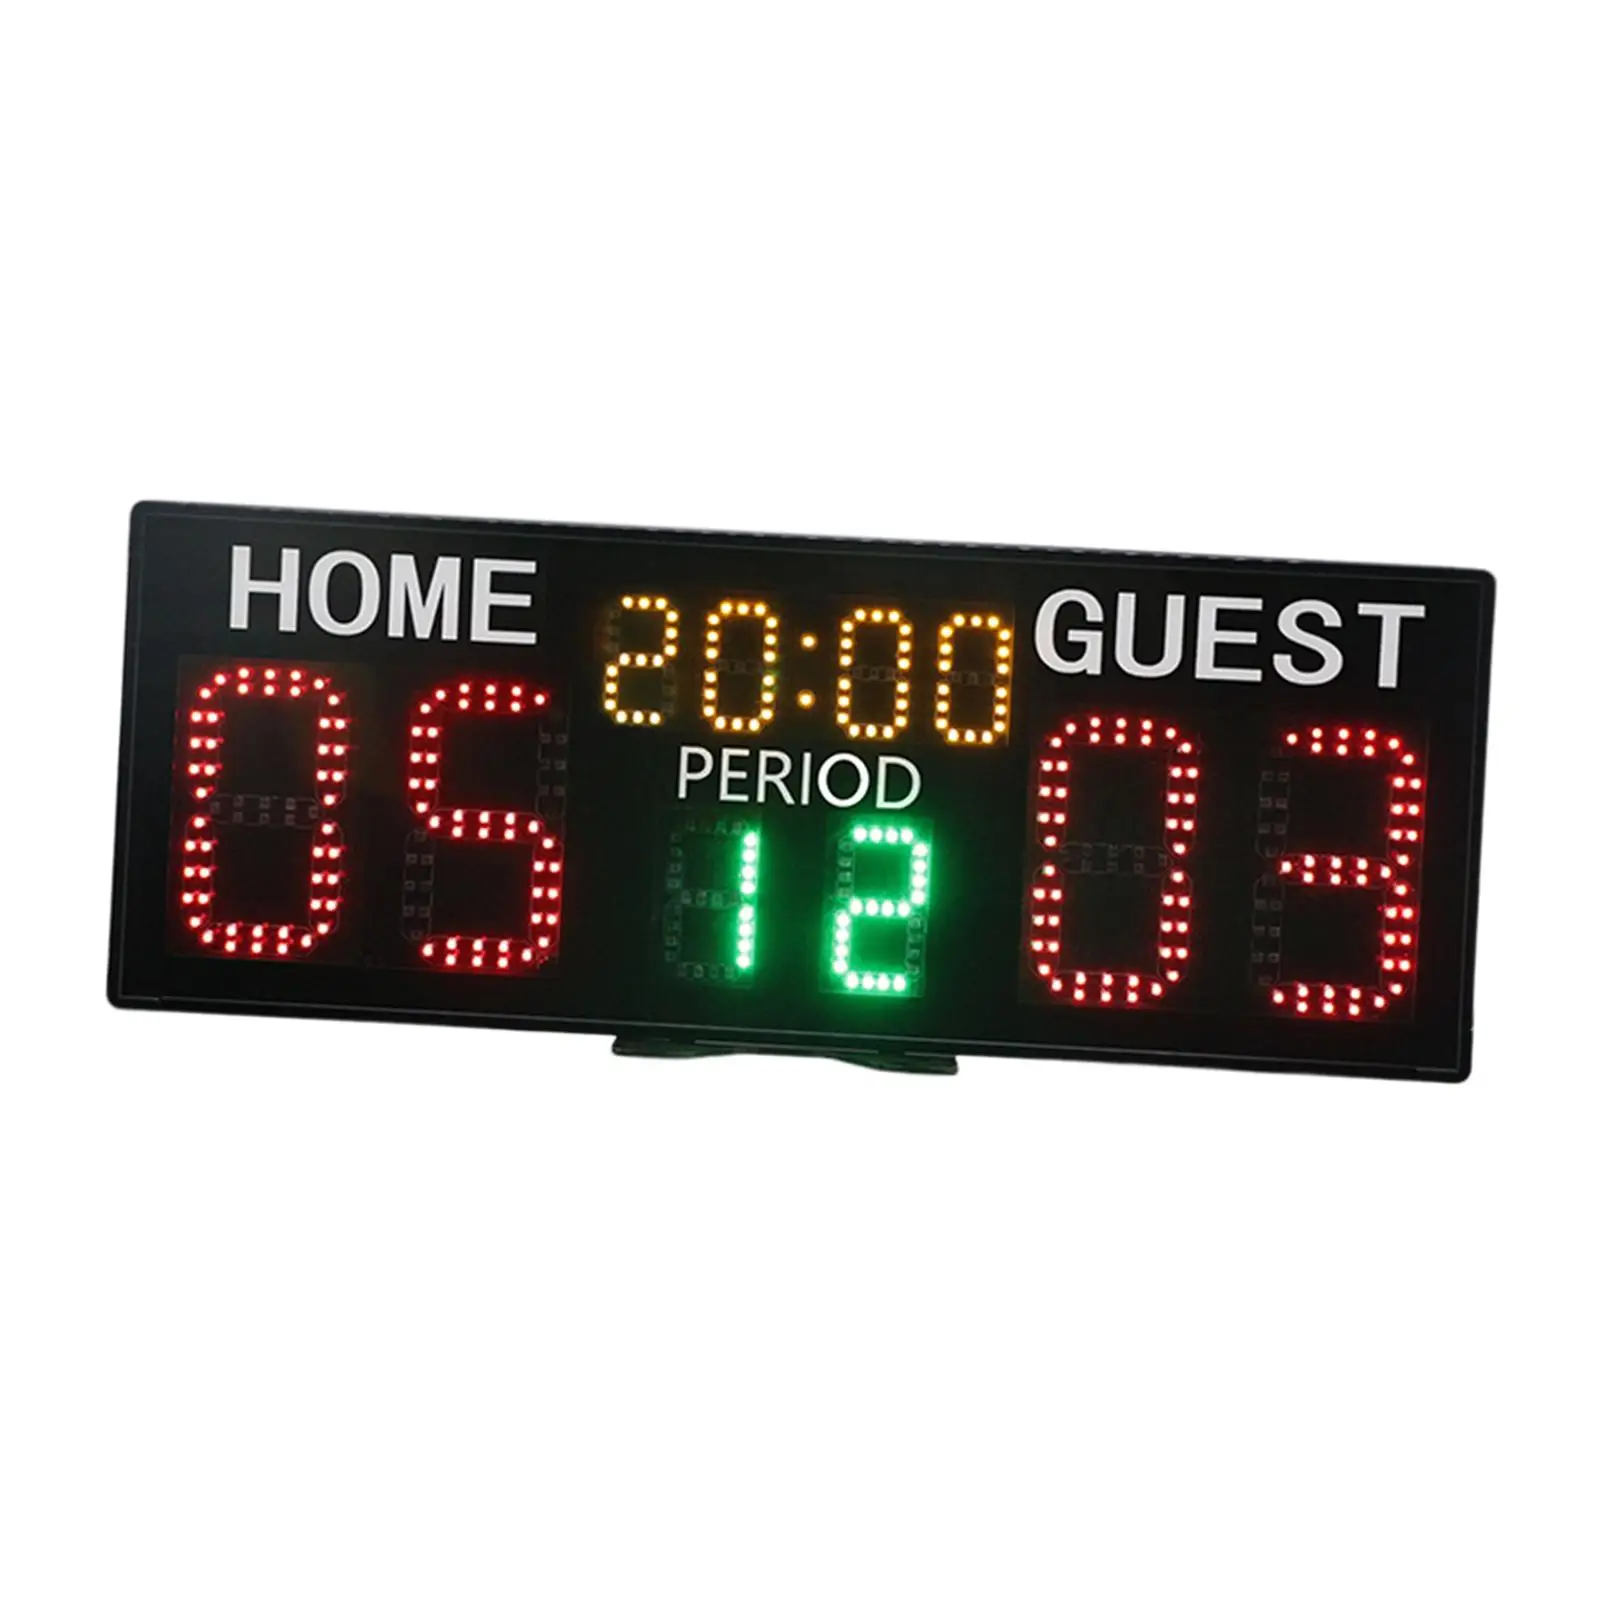 Tennis Score Keeper Professional Electronic Scoreboard Portable Score Clock for Baseball Soccer Volleyball Games Outdoor